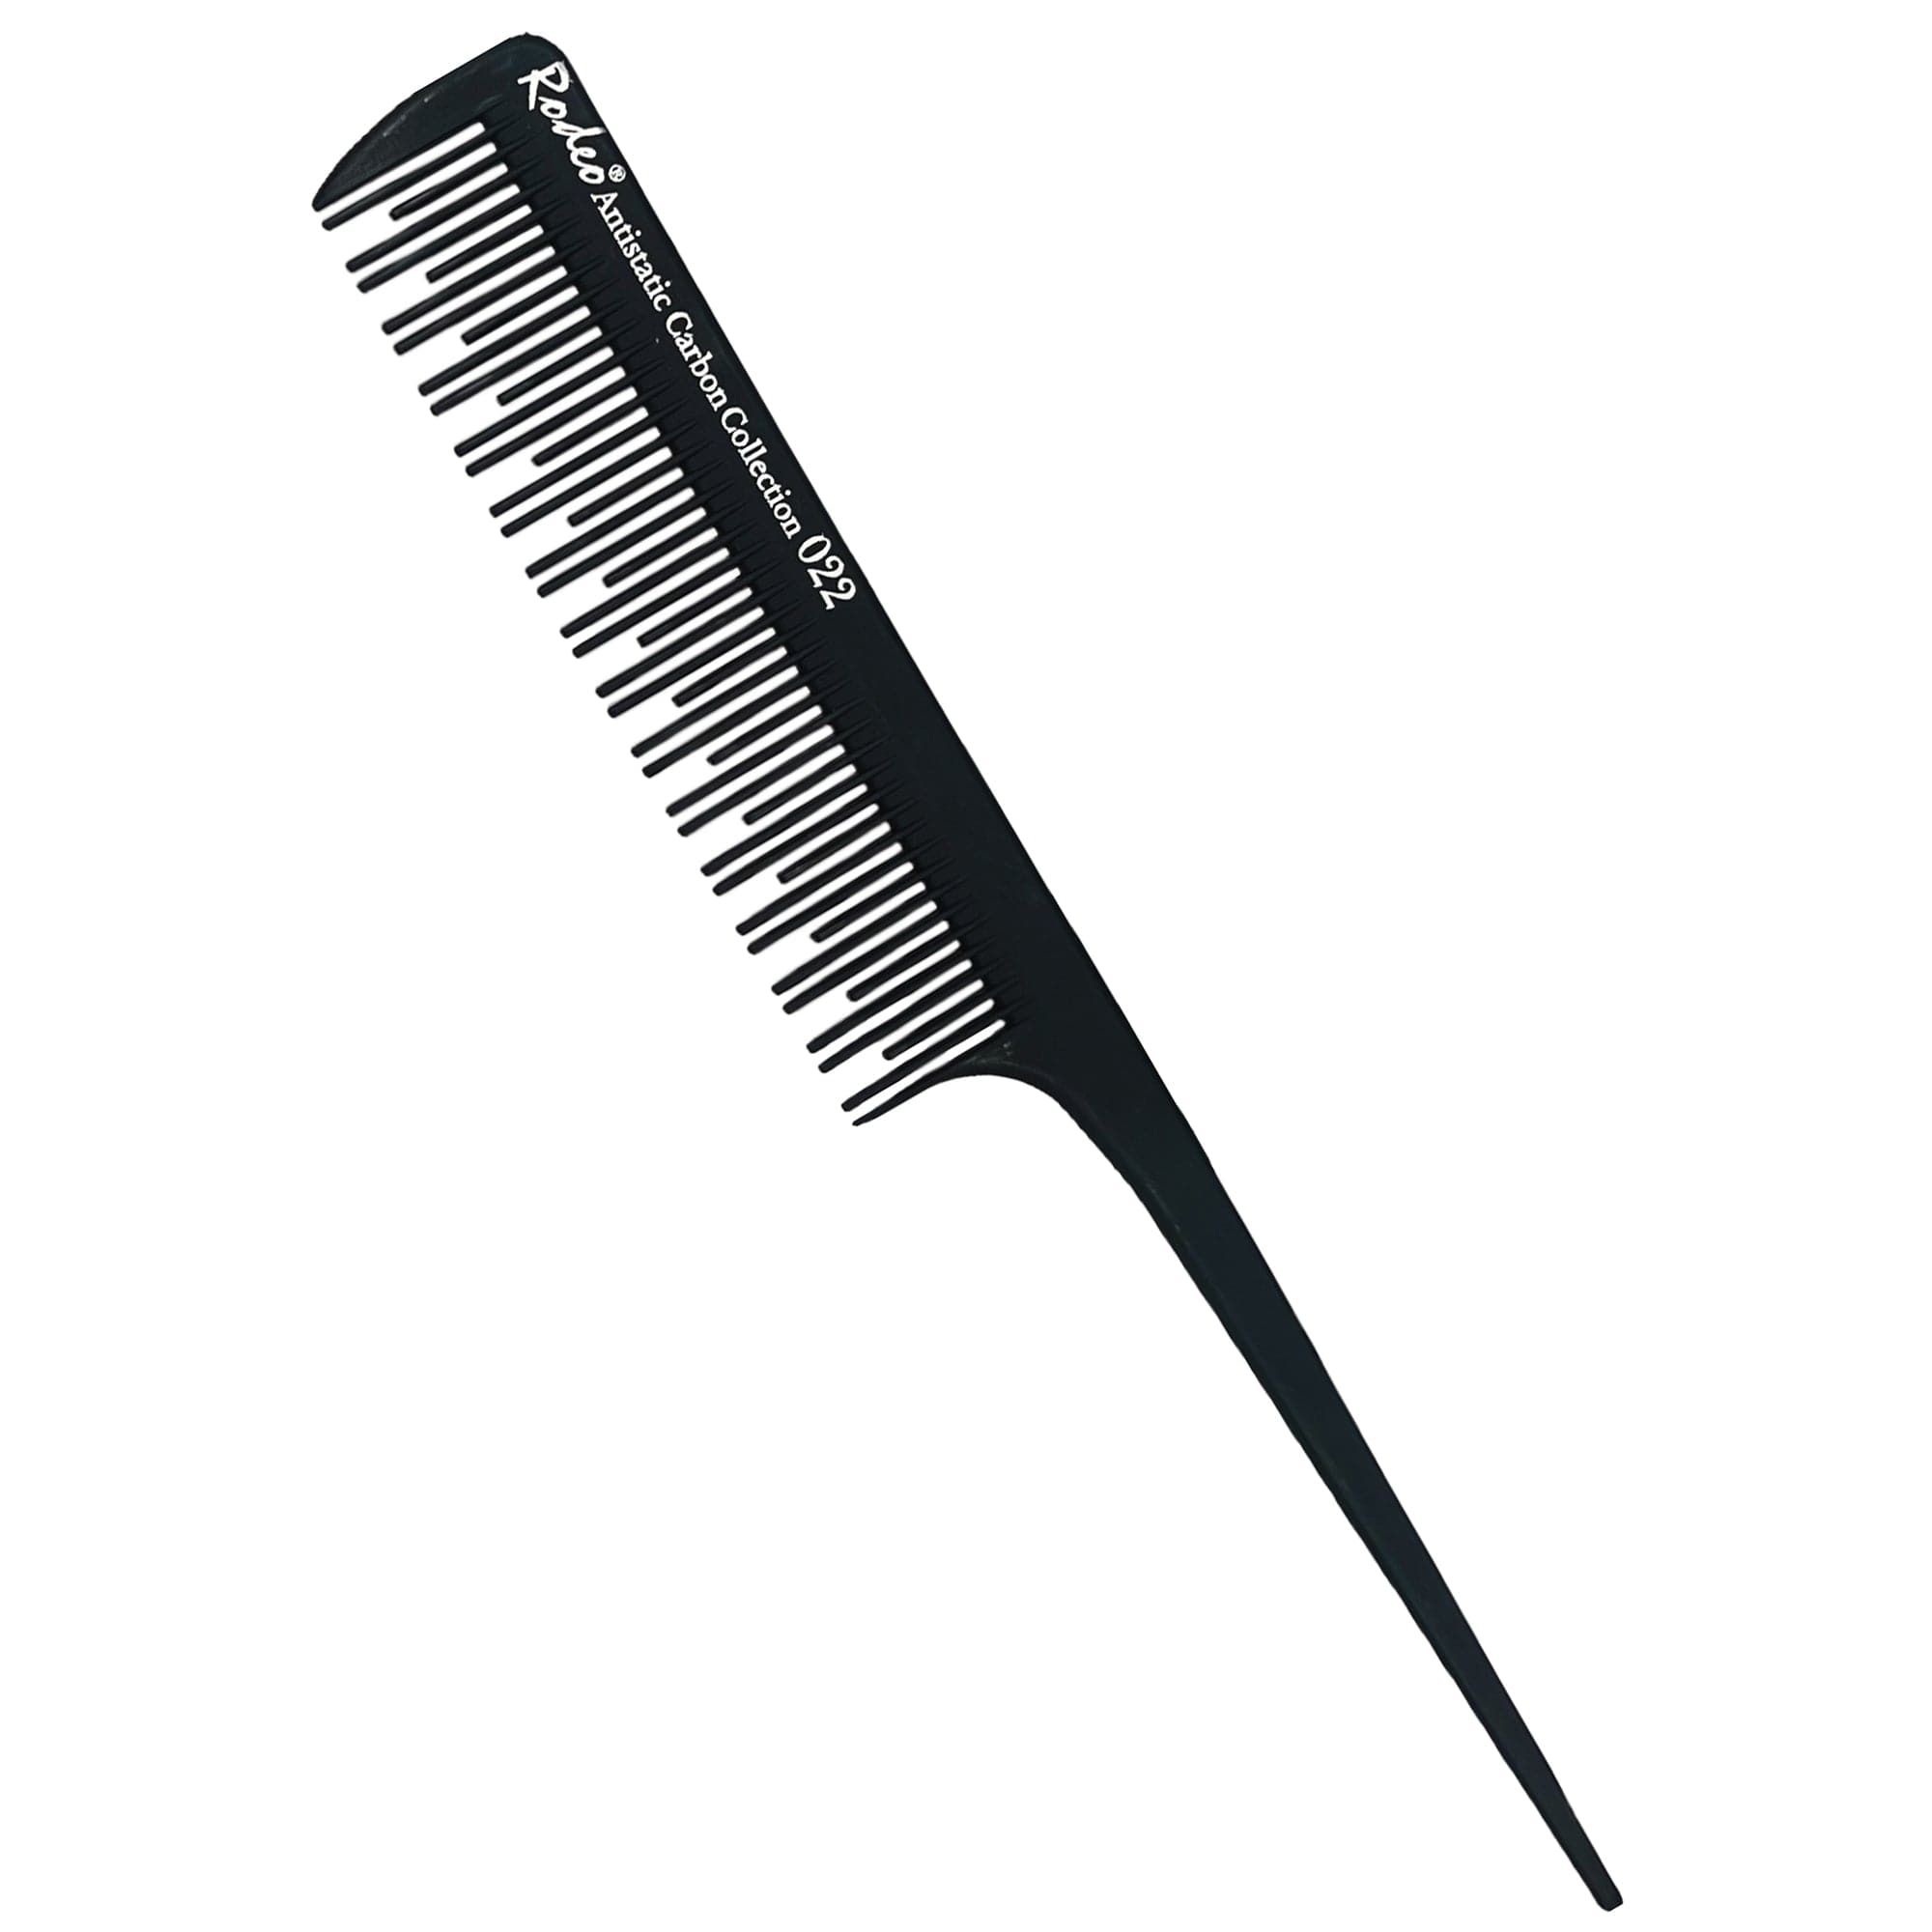 Rodeo - Pin Tail Comb Tease Fine Tooth No.022 21cm